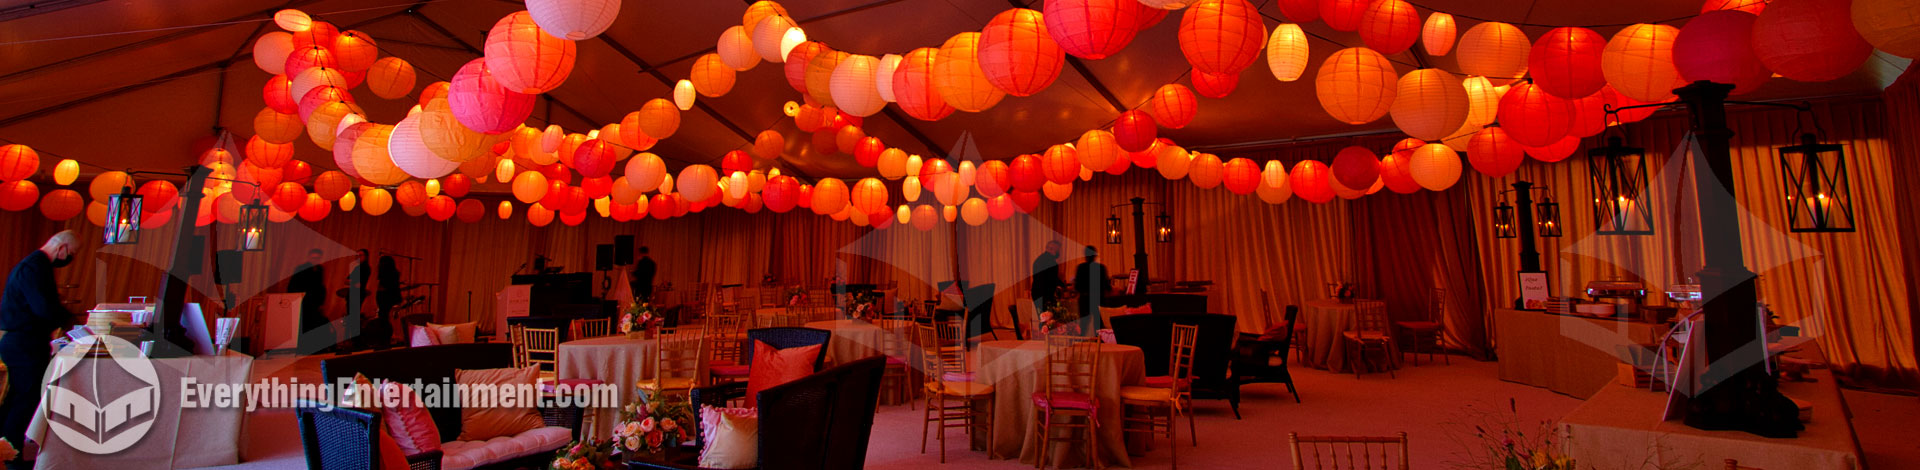 50x75-foot tent with colorful paper lanterns